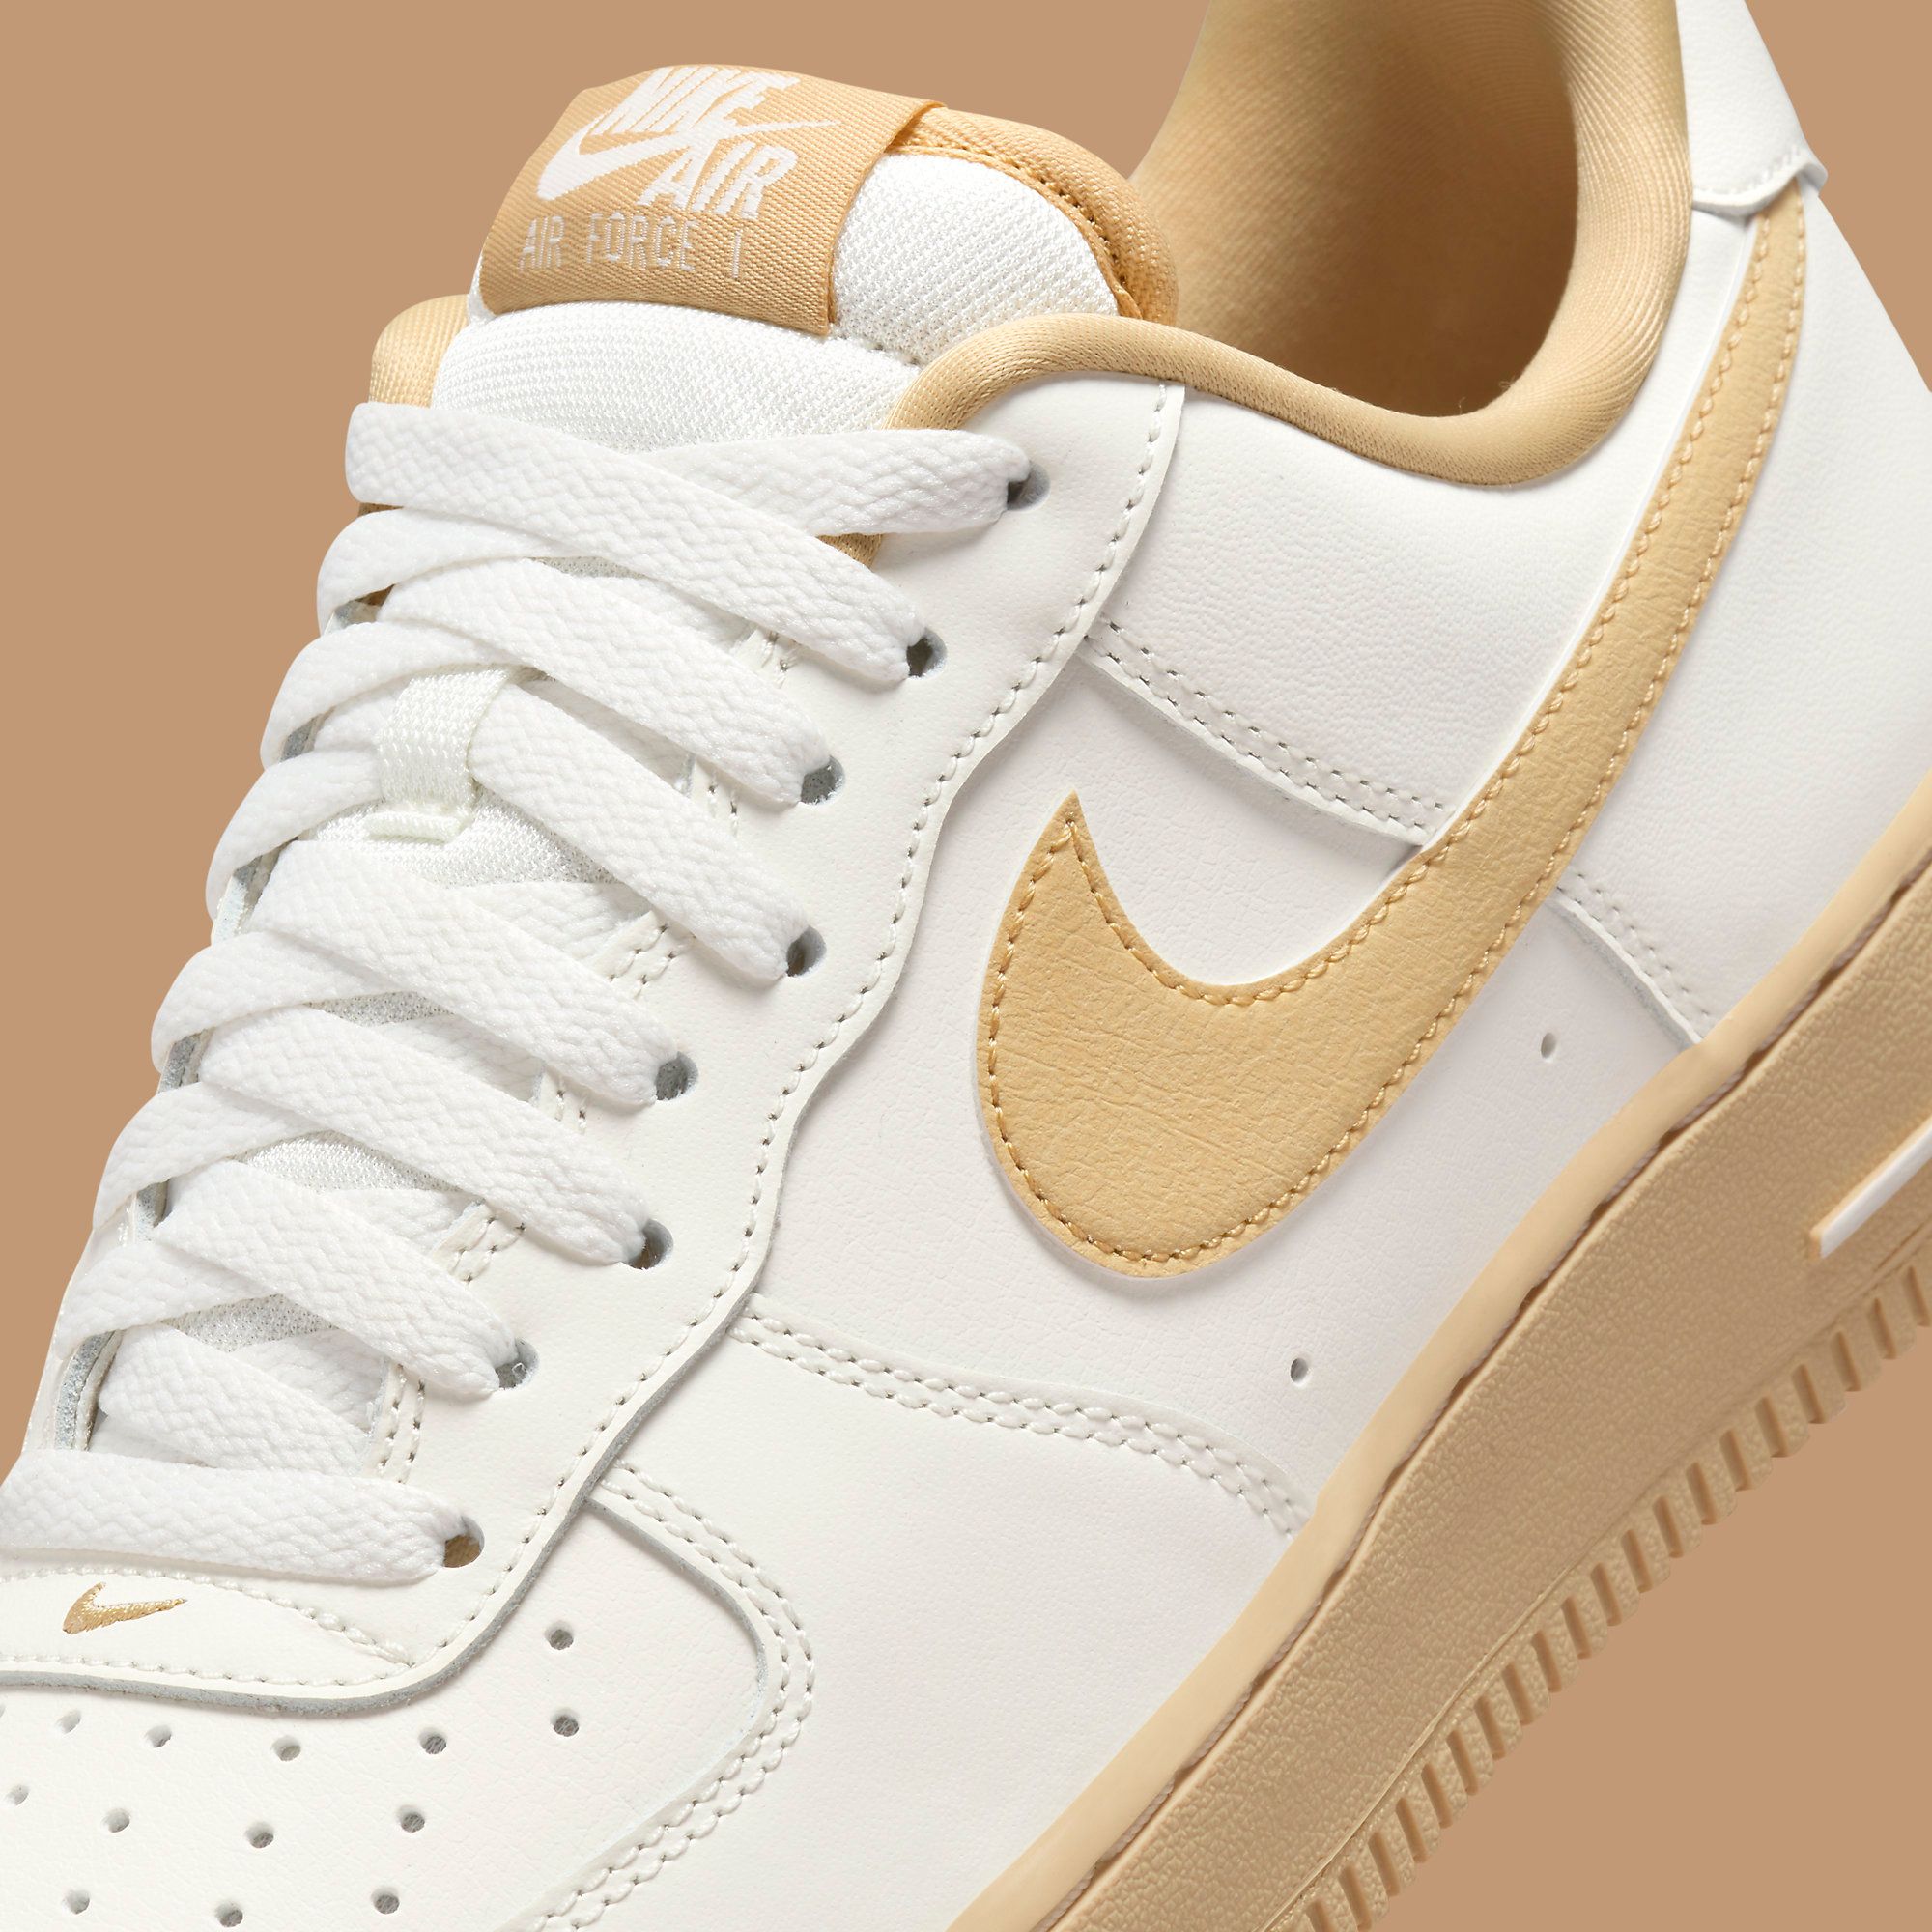 The Nike Air Force 1 is Available Now in White and Sesame | House